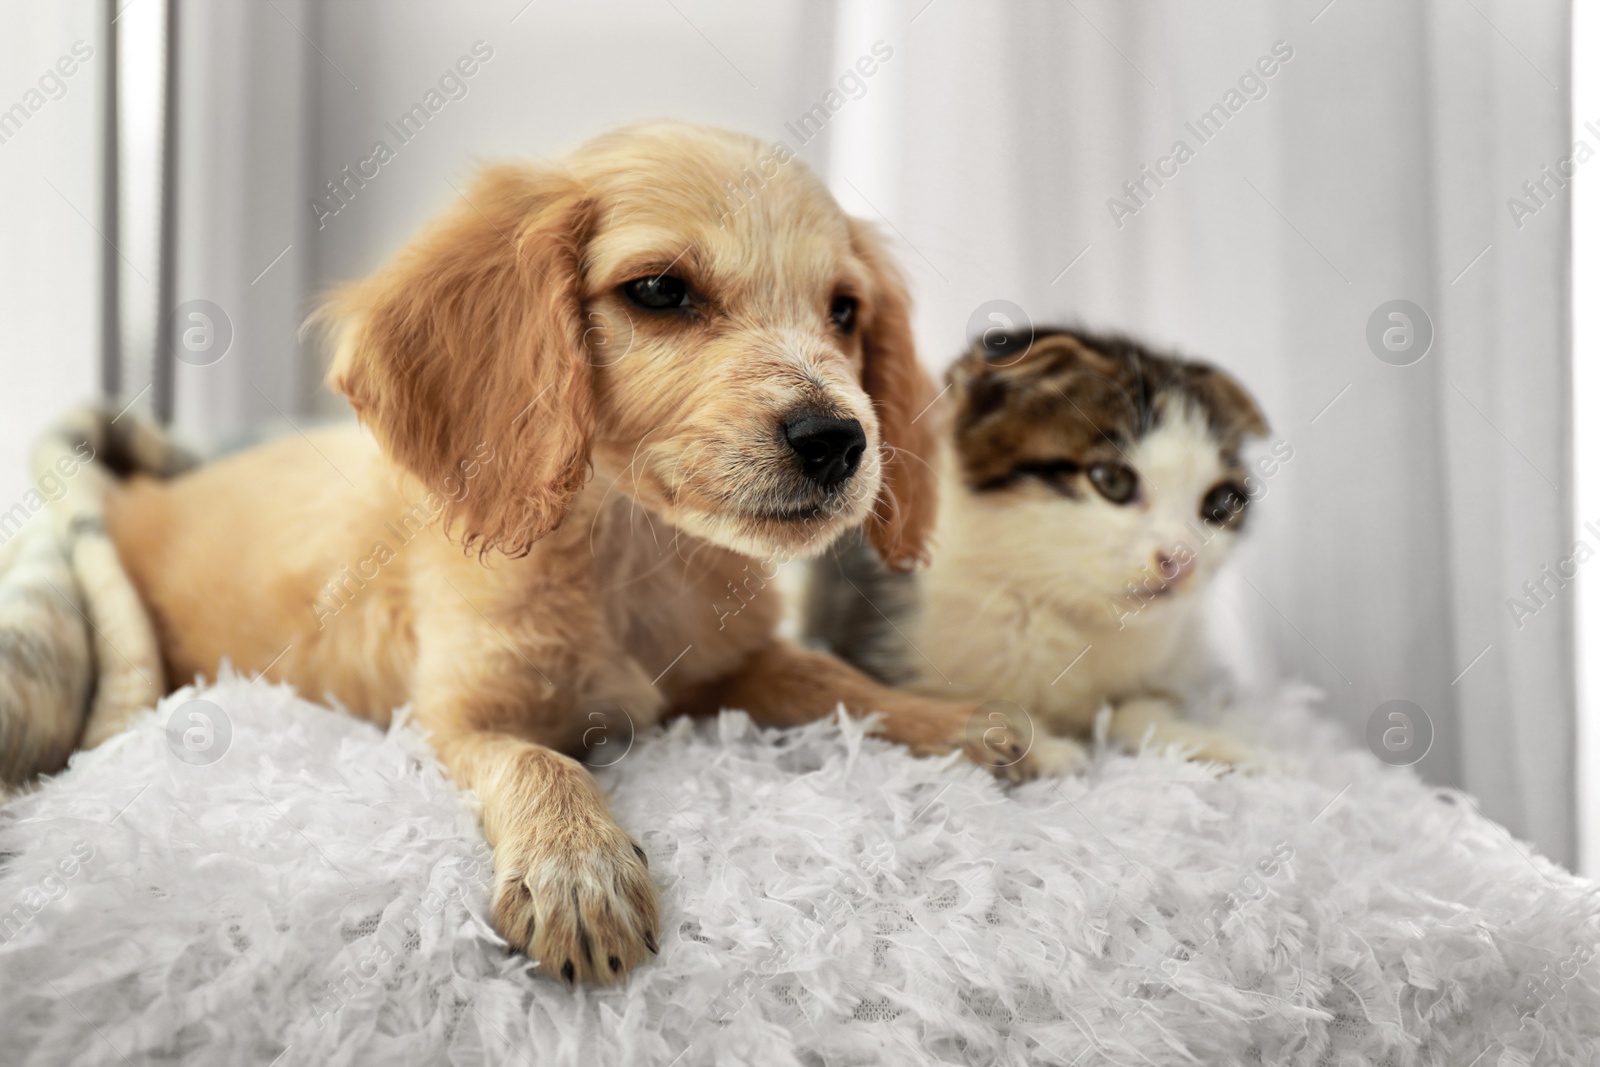 Photo of Adorable little kitten and puppy on pillow near window indoors